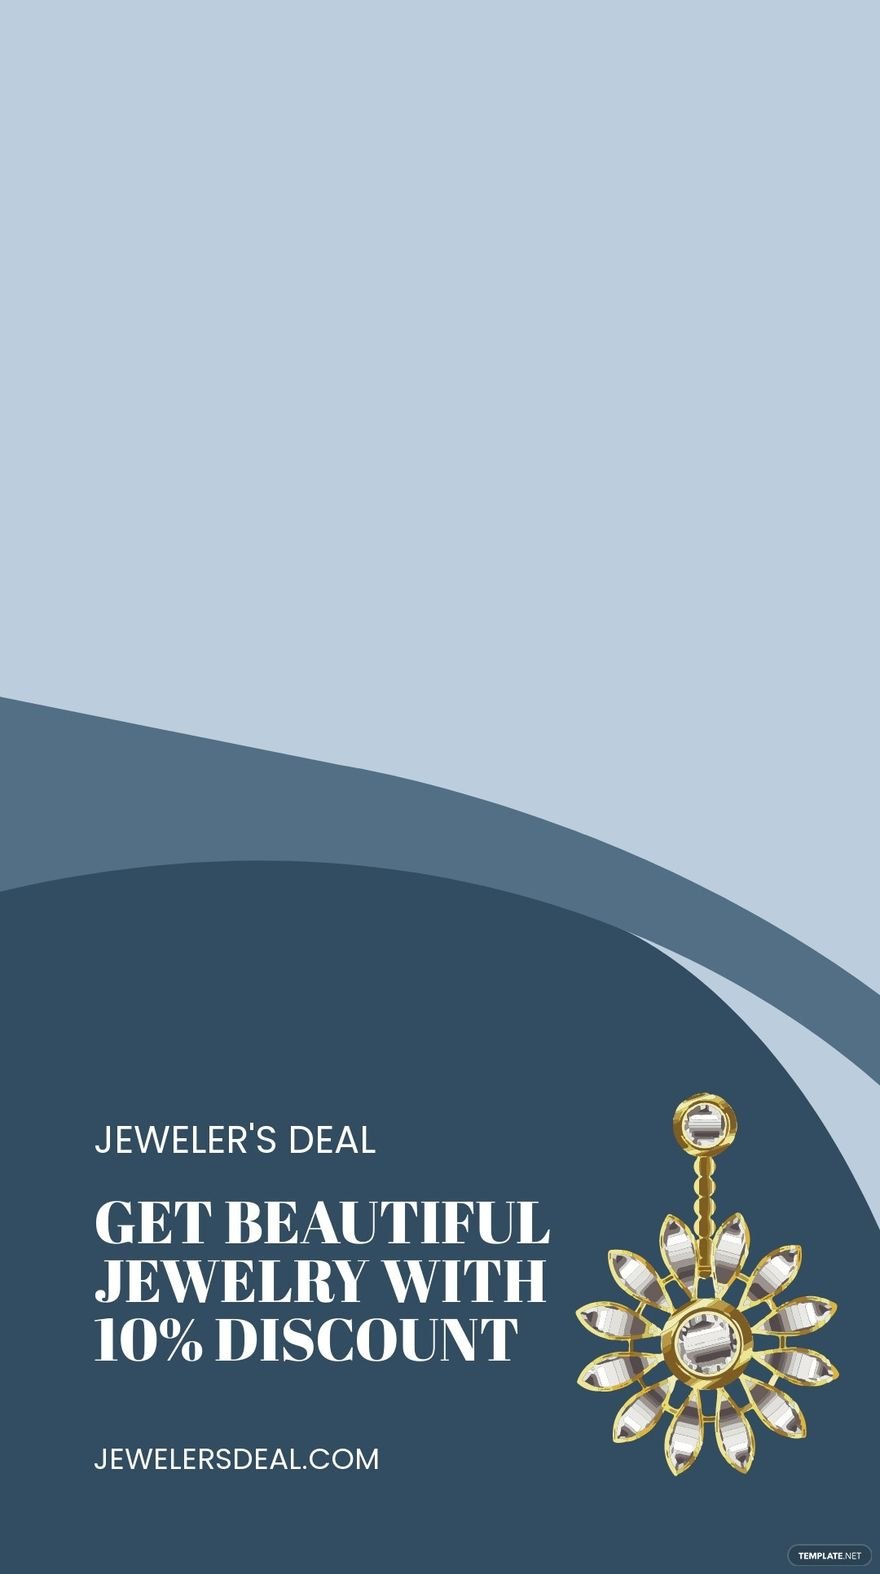 Jewelry Discount Snapchat Geofilter